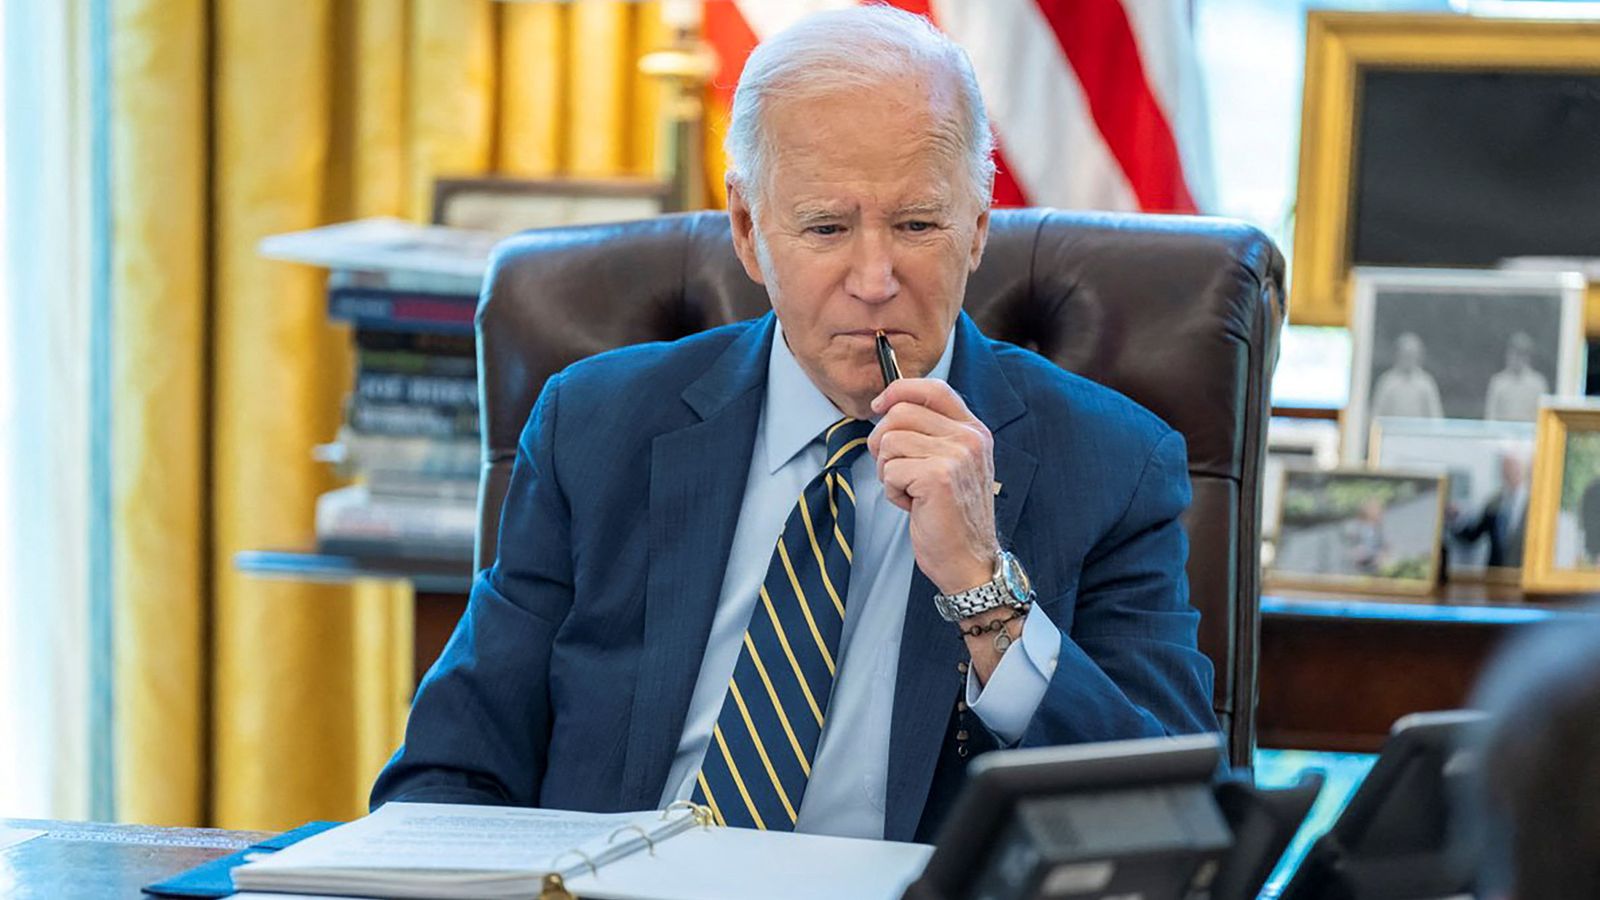 Israel's attack on Iran reflects badly on Biden after president's public message for Netanyahu